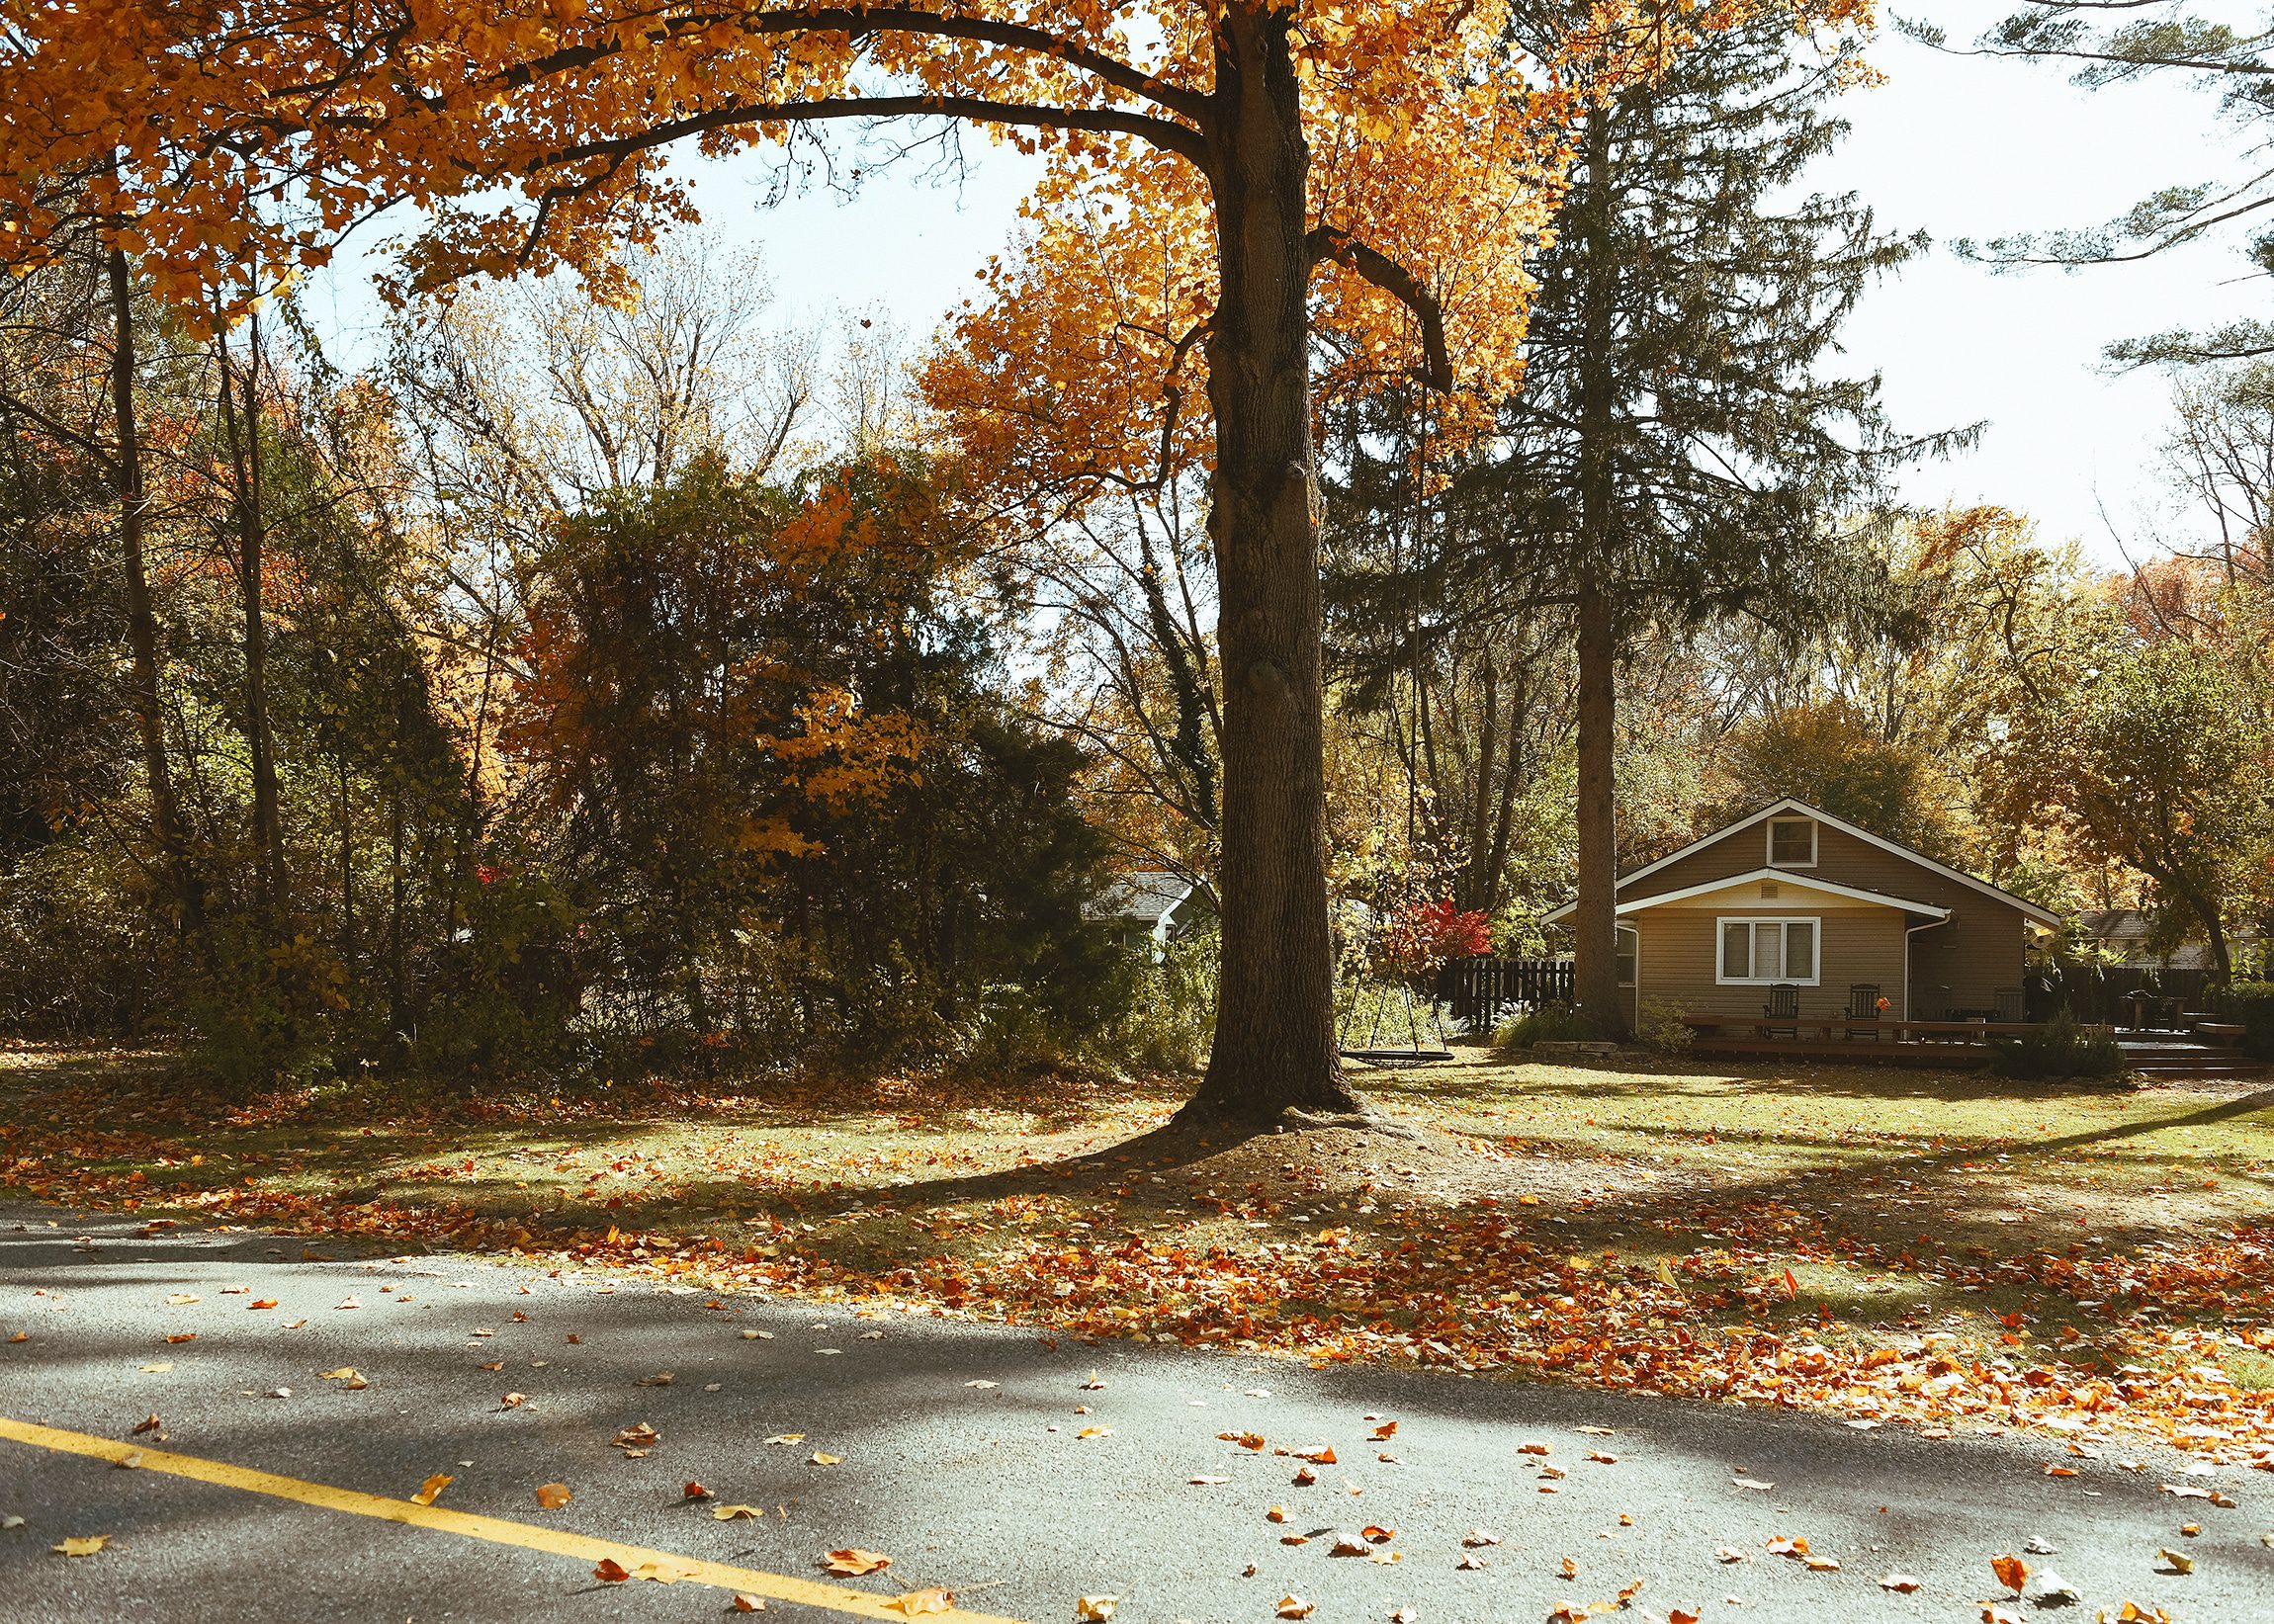 A view of our Michigan home from the street, colored with fall foliage | via Yellow Brick Home